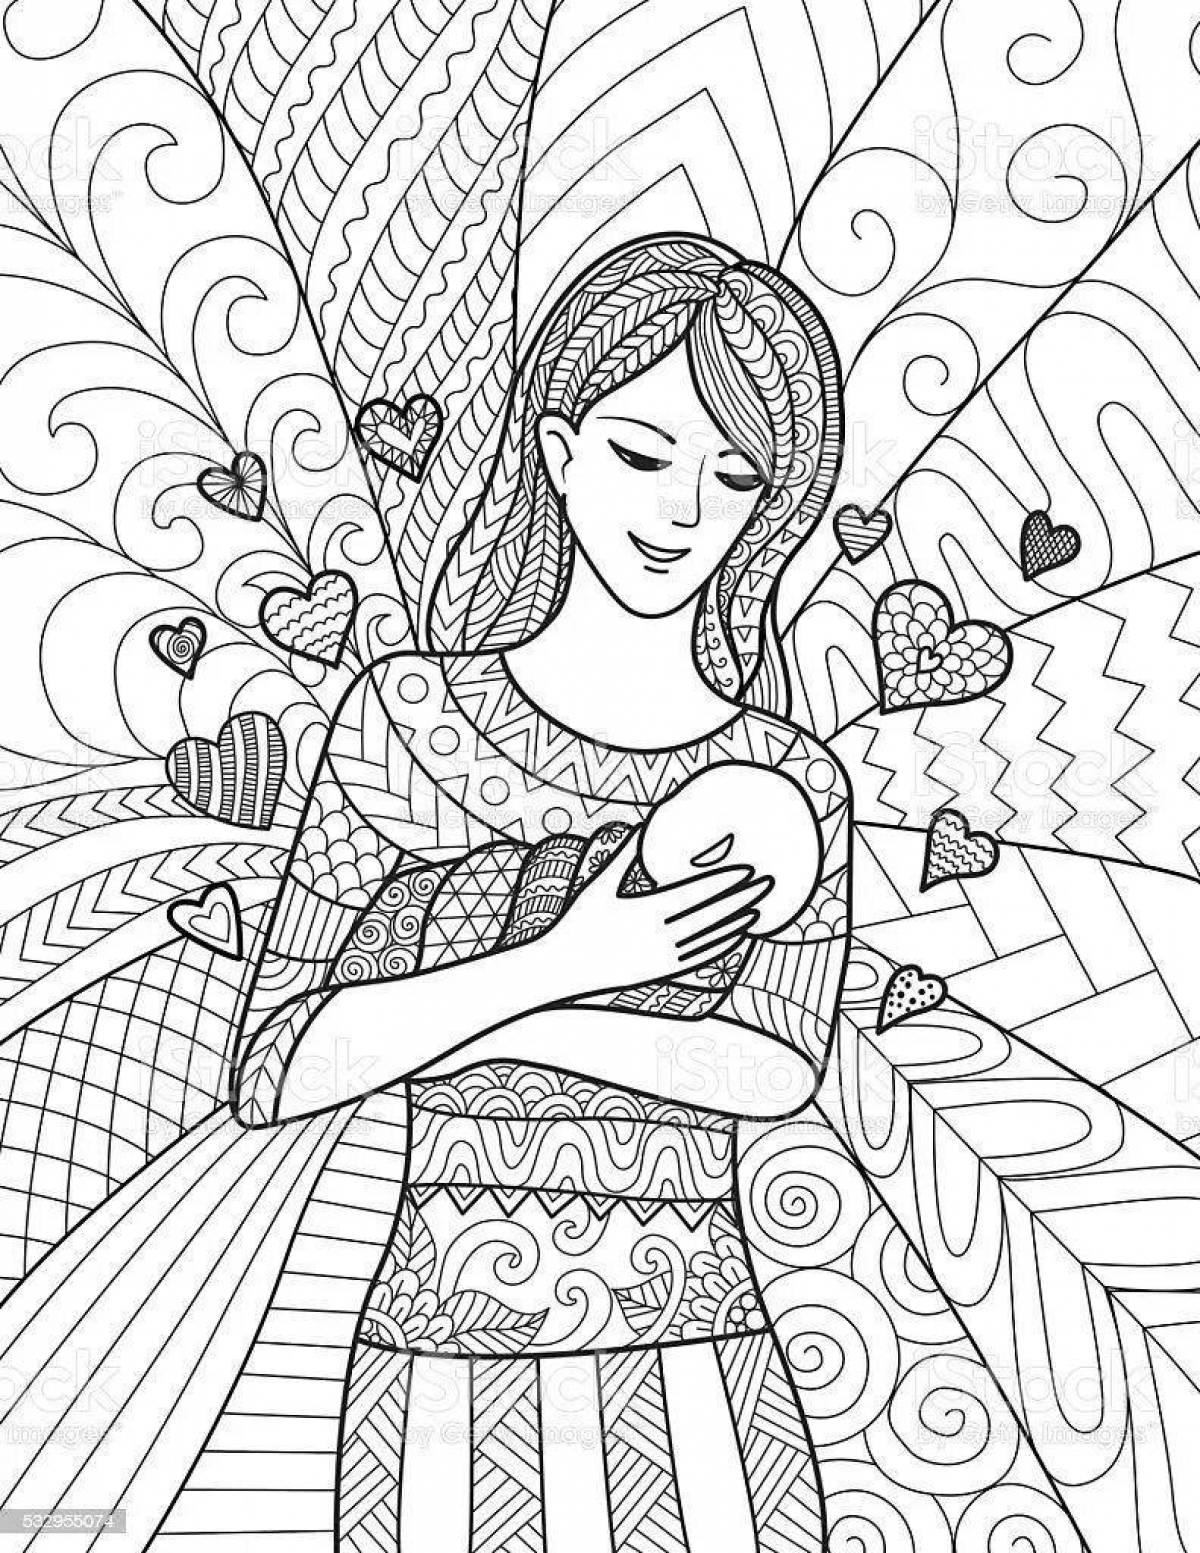 Pregnancy anti-aging coloring page